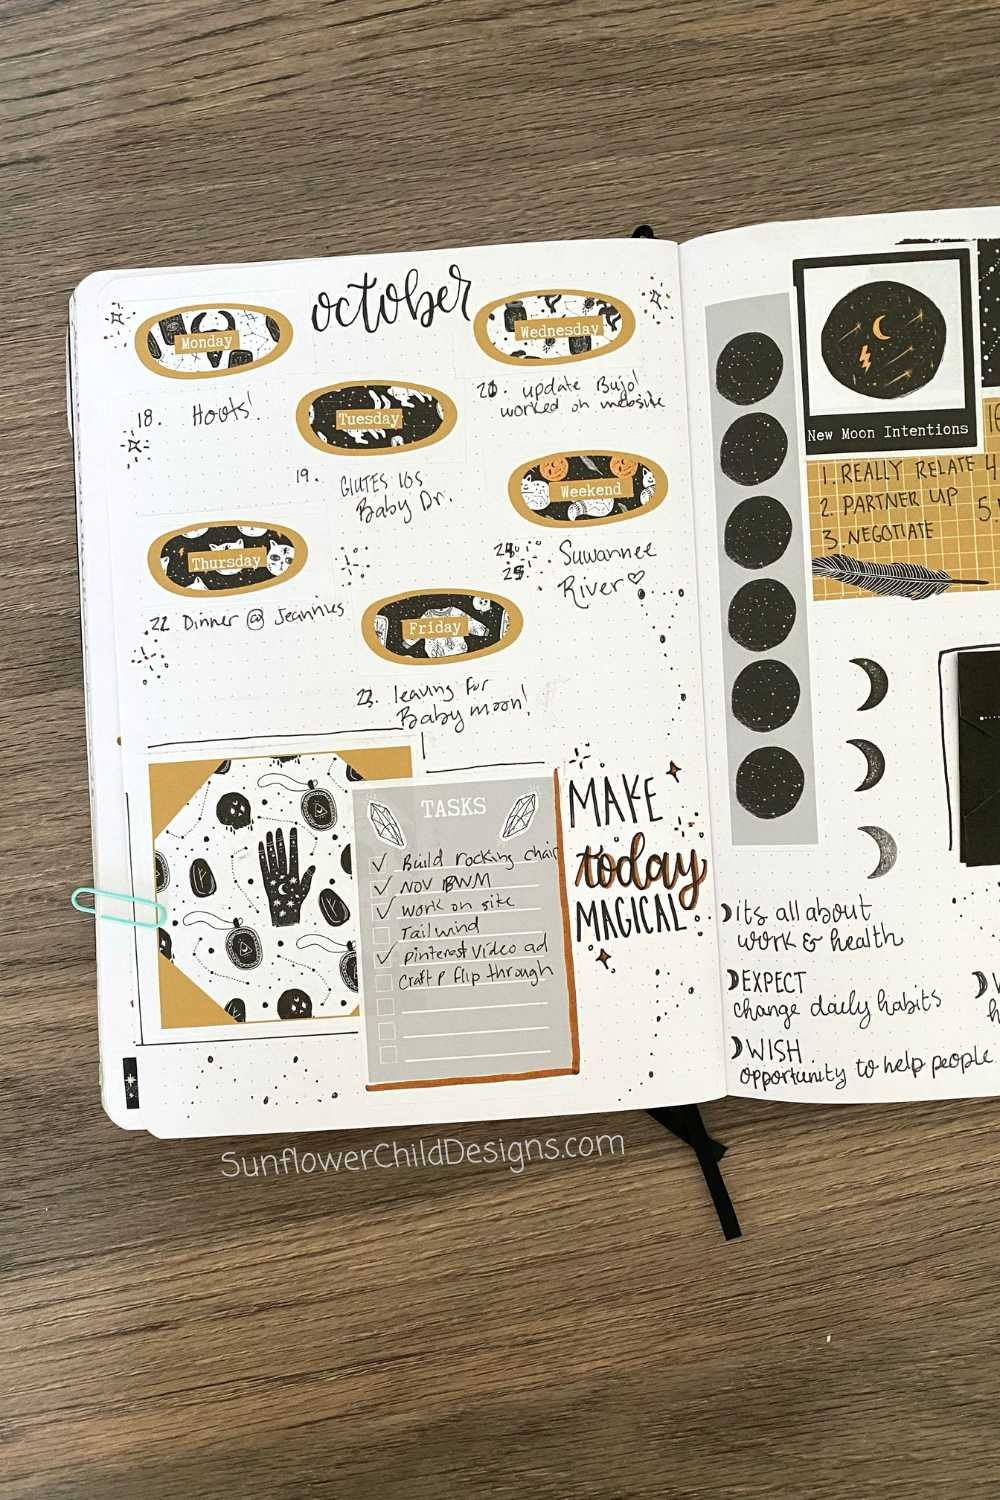 Creatures of the Night Journal Kit Printable Planner Stickers